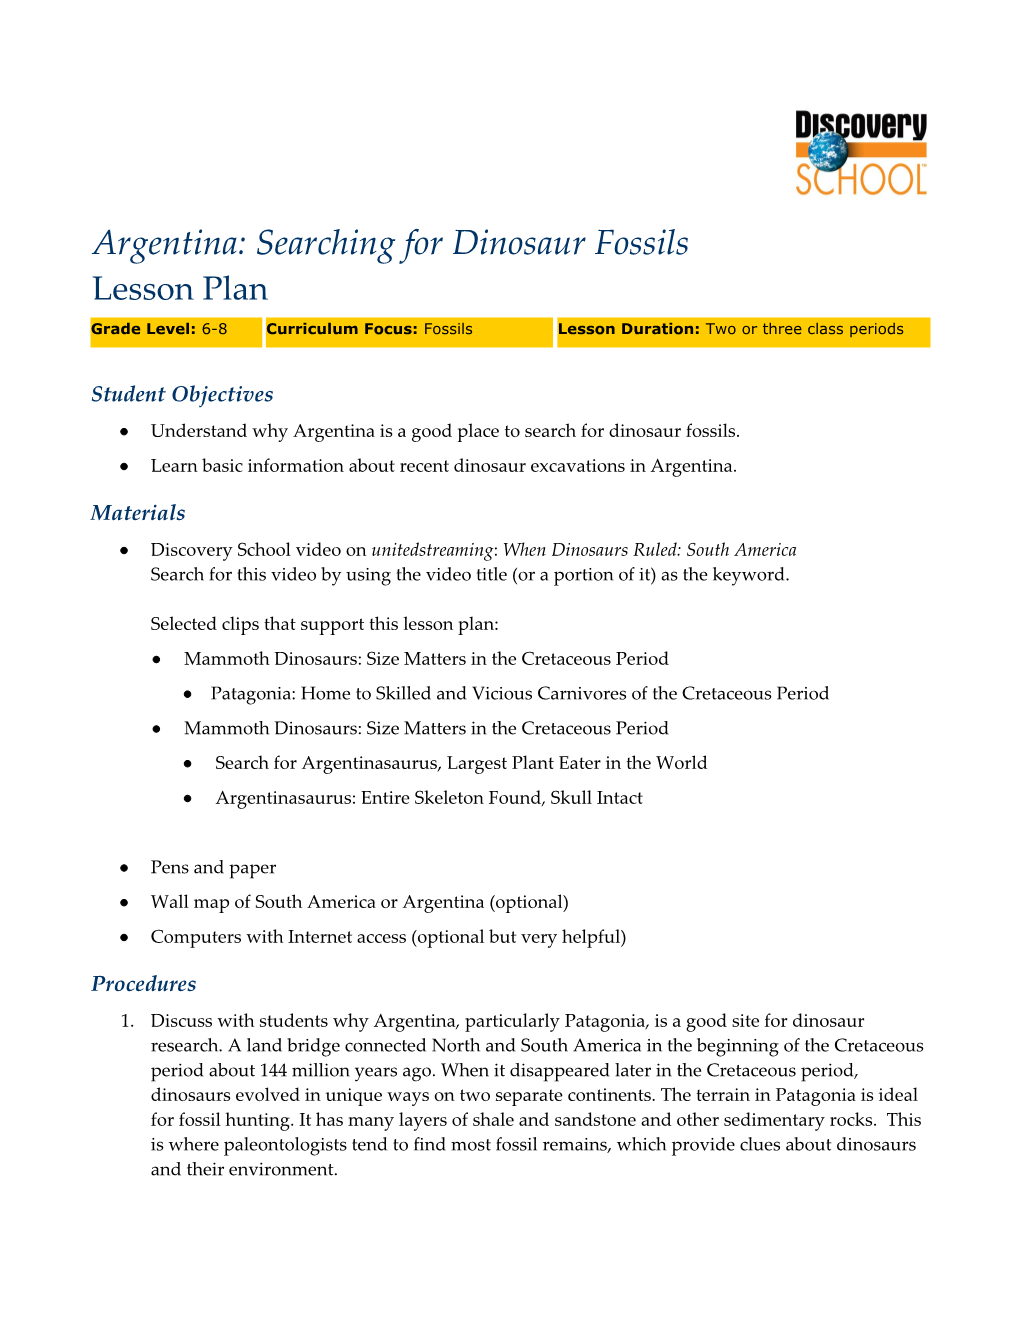 Argentina: Searching for Dinosaur Fossils